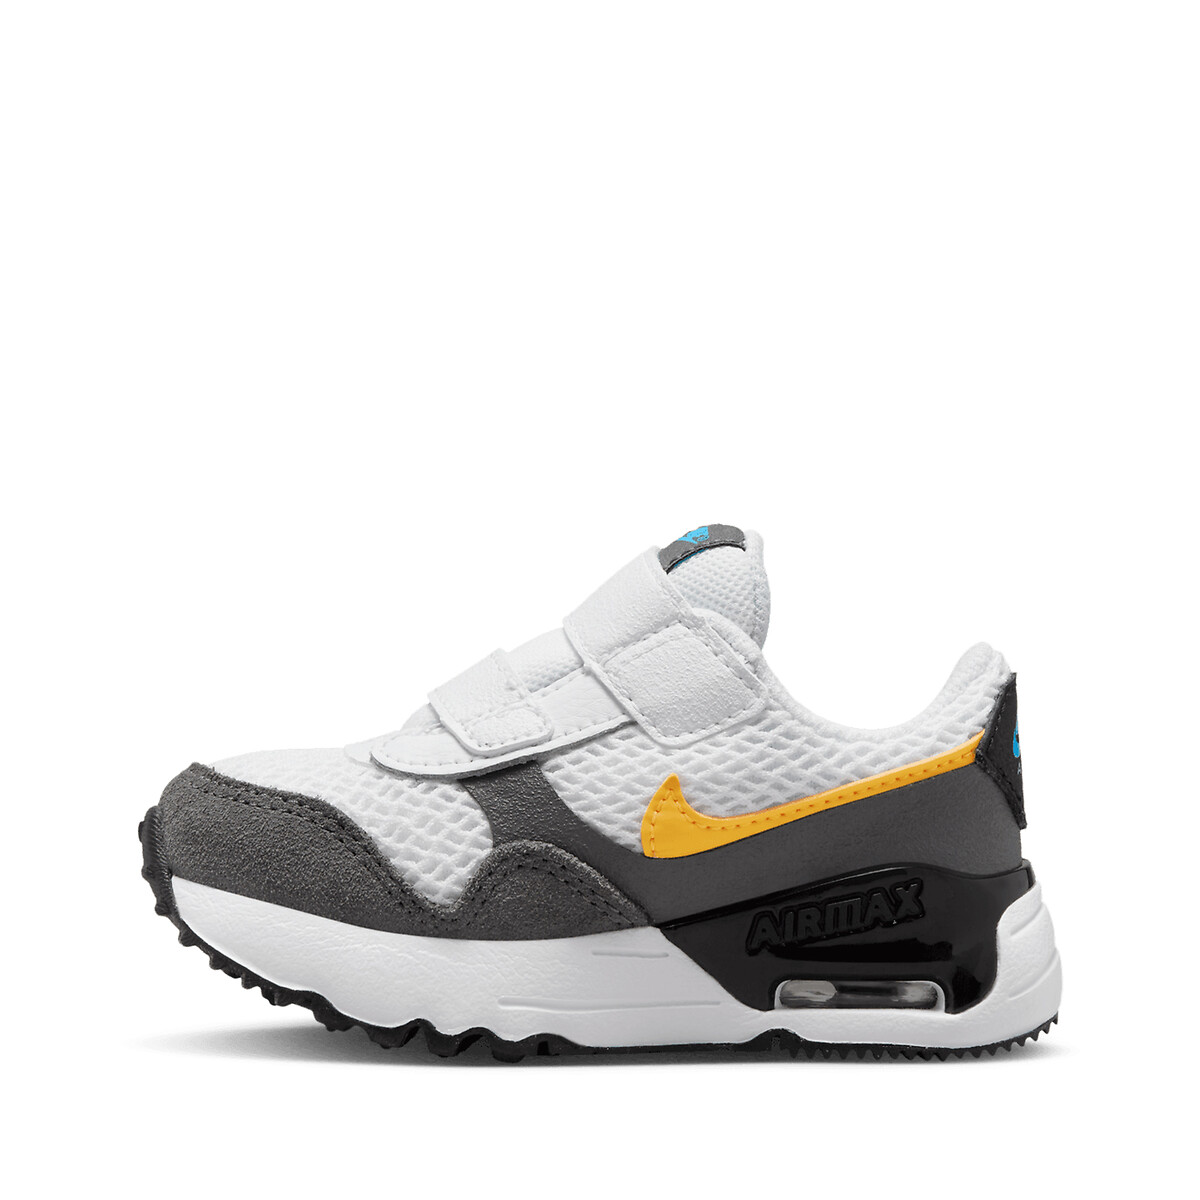 Sneakers air weiss systm Redoute max Nike | La